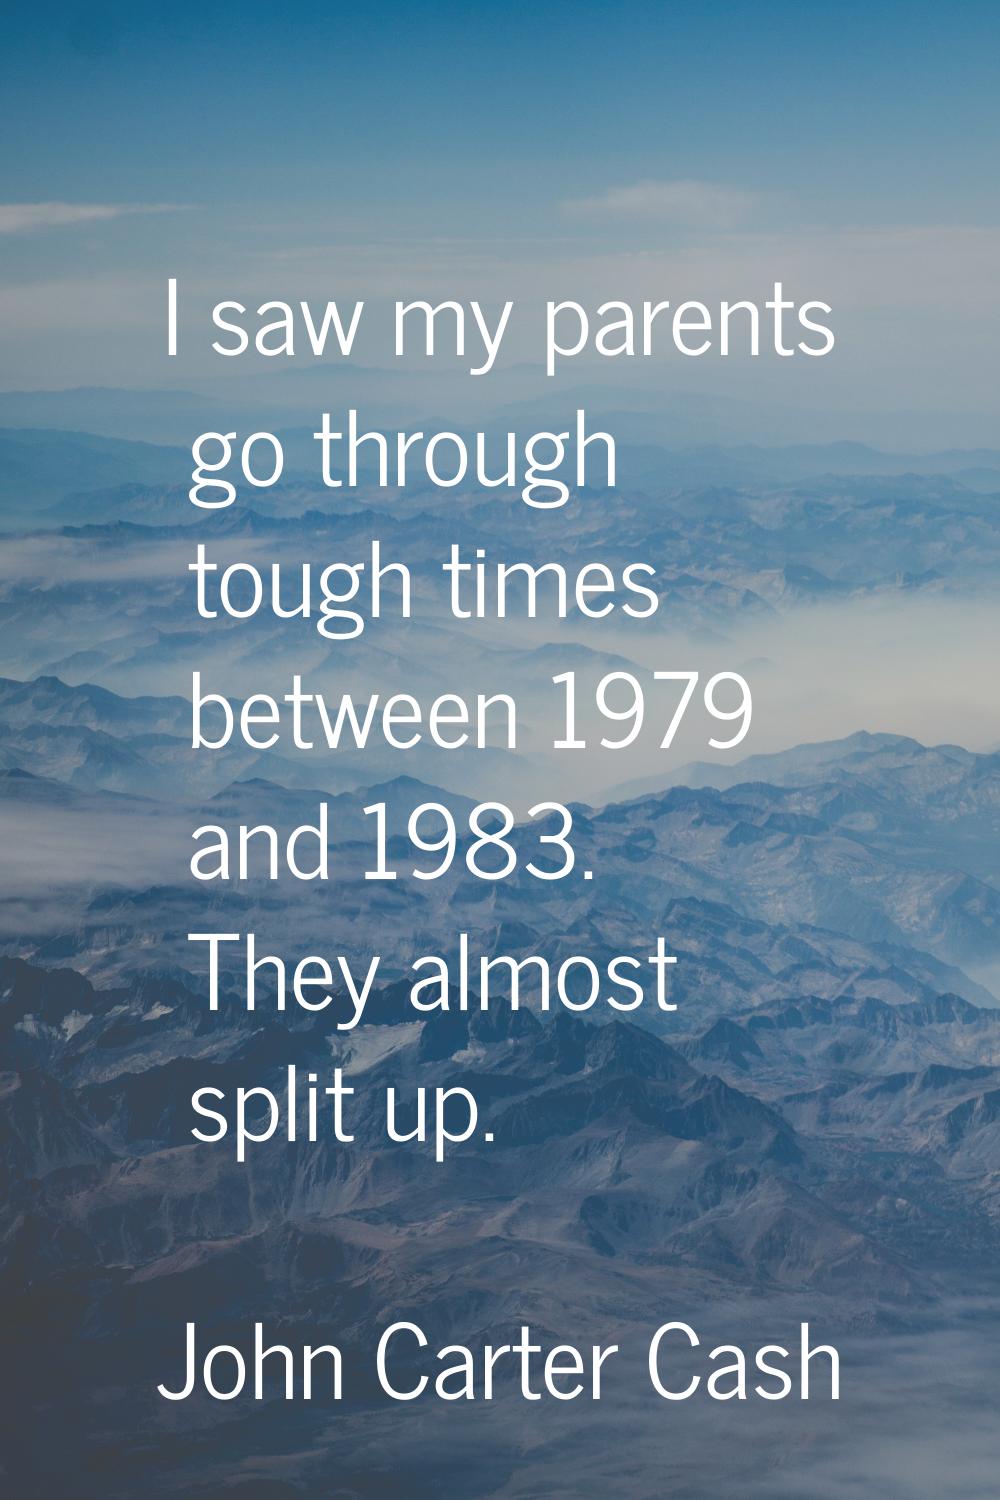 I saw my parents go through tough times between 1979 and 1983. They almost split up.